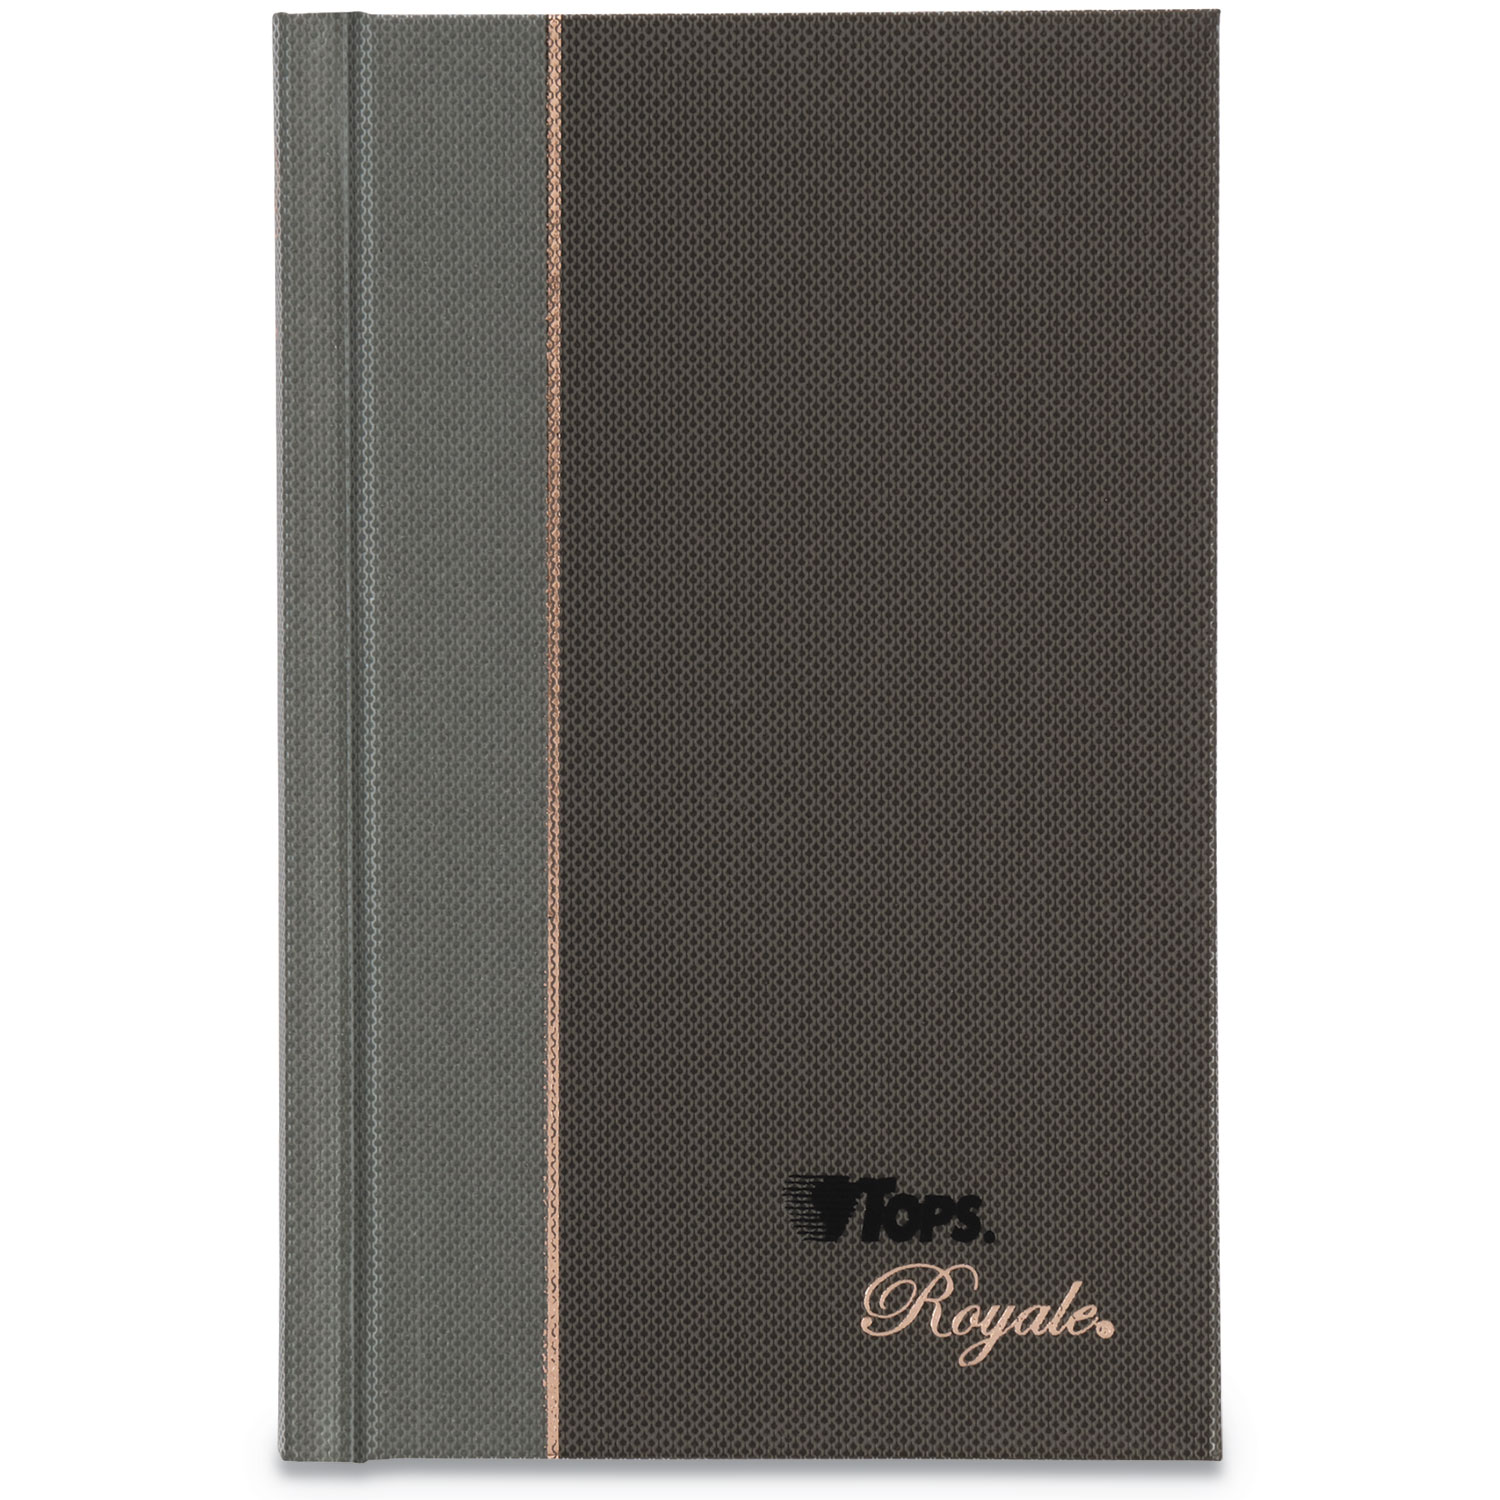  TOPS 25229 Royale Casebound Business Notebook, College, Black/Gray, 5.5 x 3.5, 96 Sheets (TOP25229) 